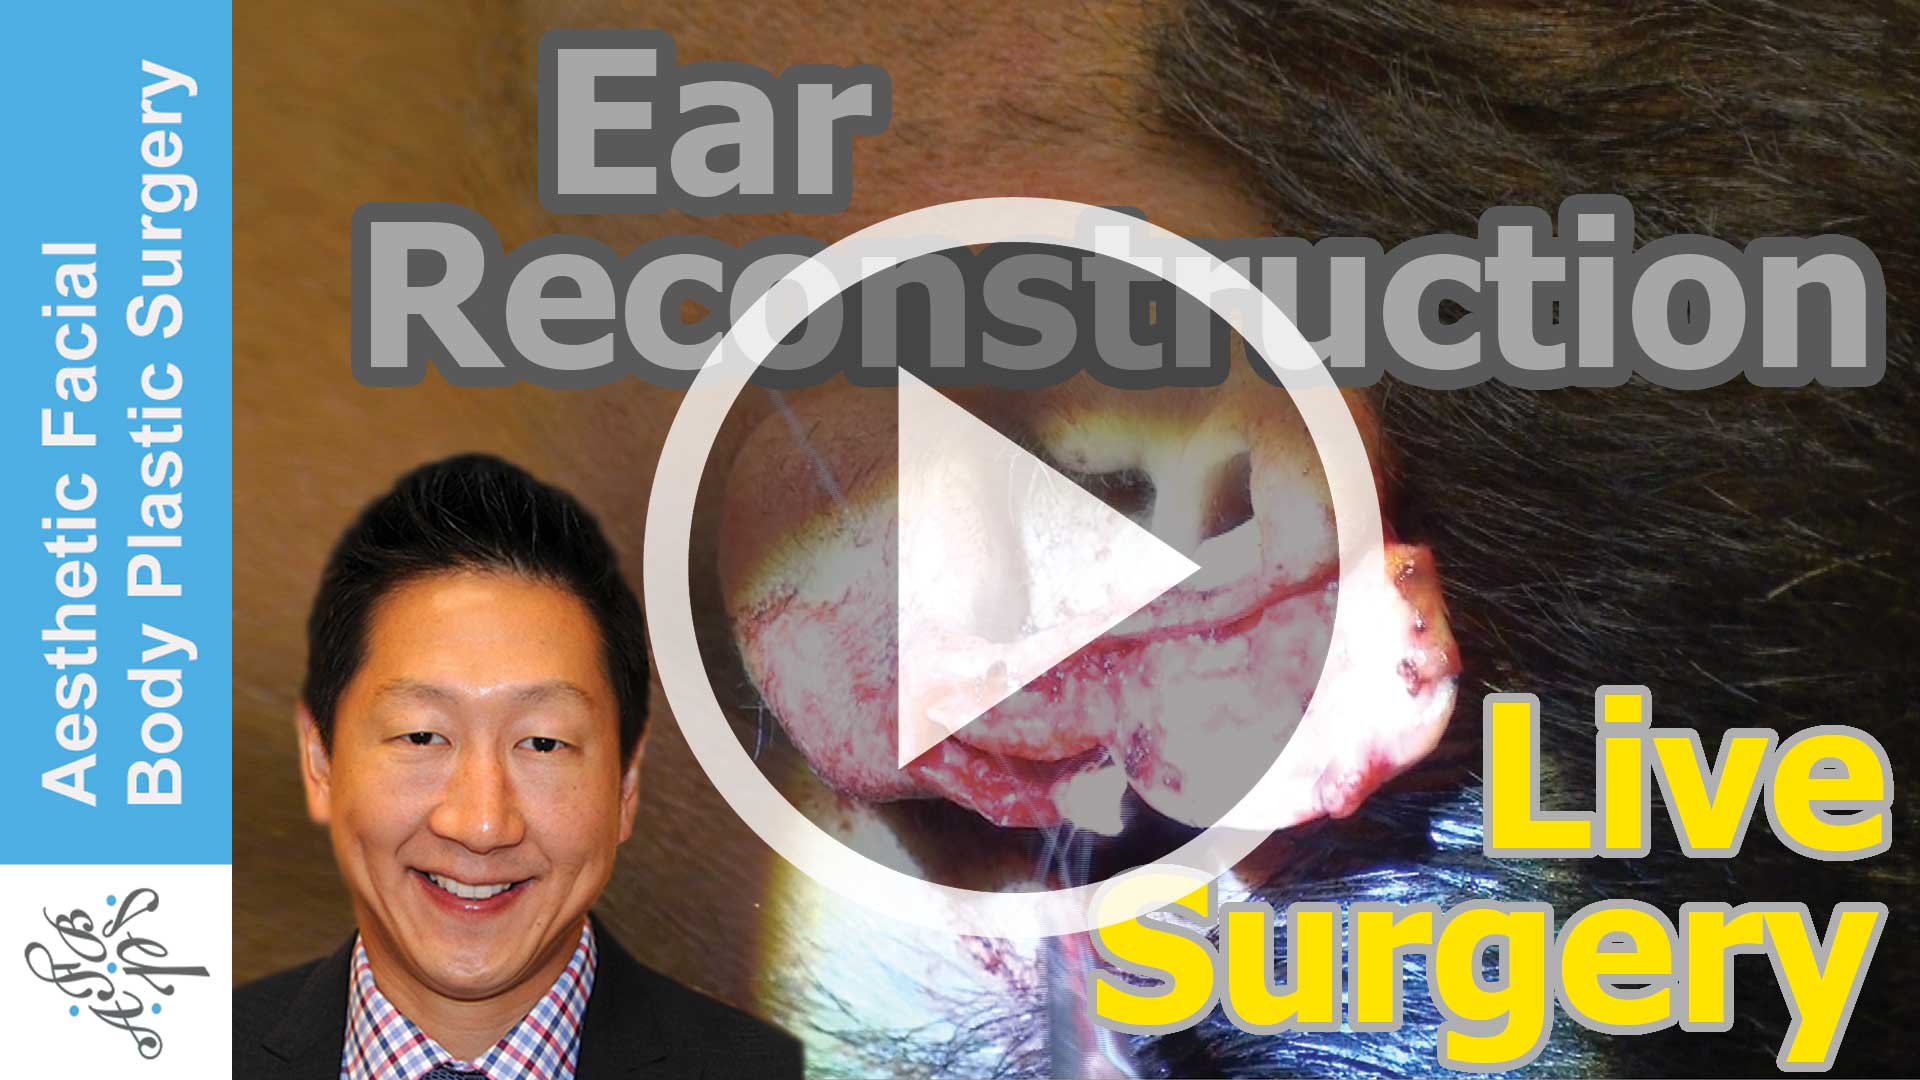 Ear Reconstruction Live Surgery of a Bite Injury of the Top of the Ear by Bellevue Seattle Dr Young